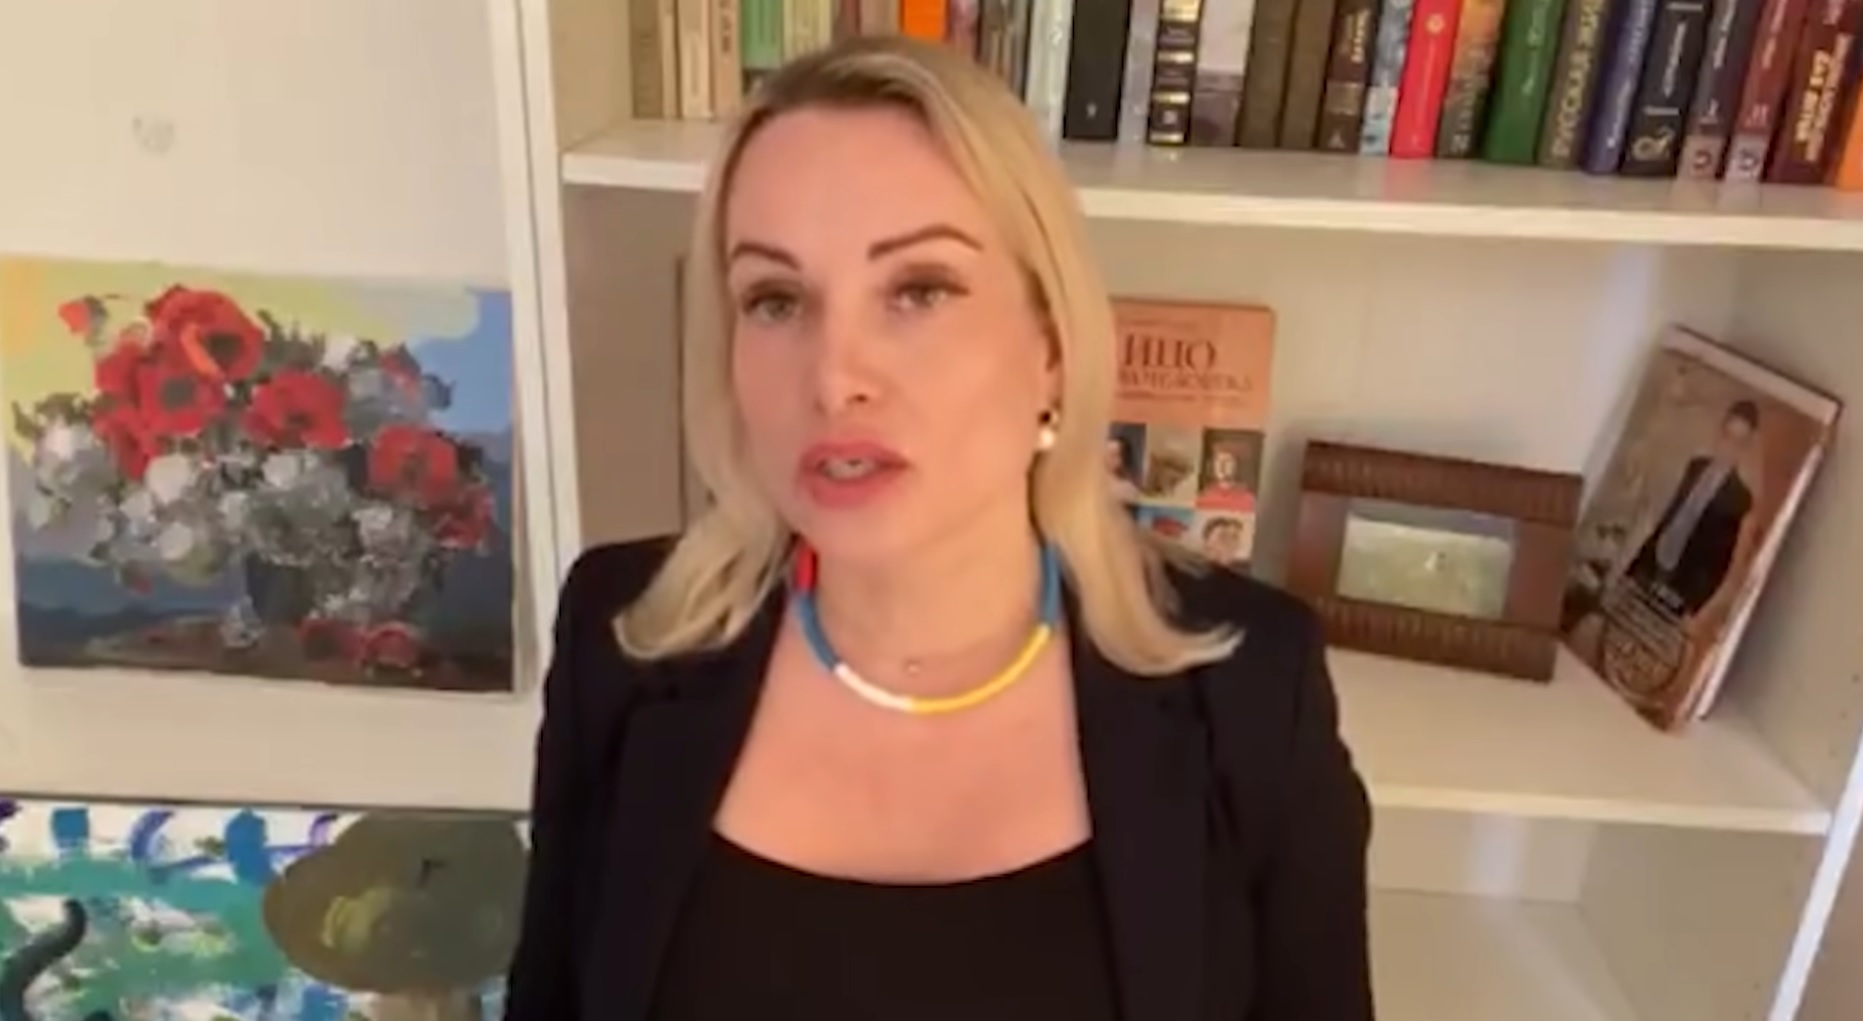 Marina Ovsyannikov posted a video message online about her protest